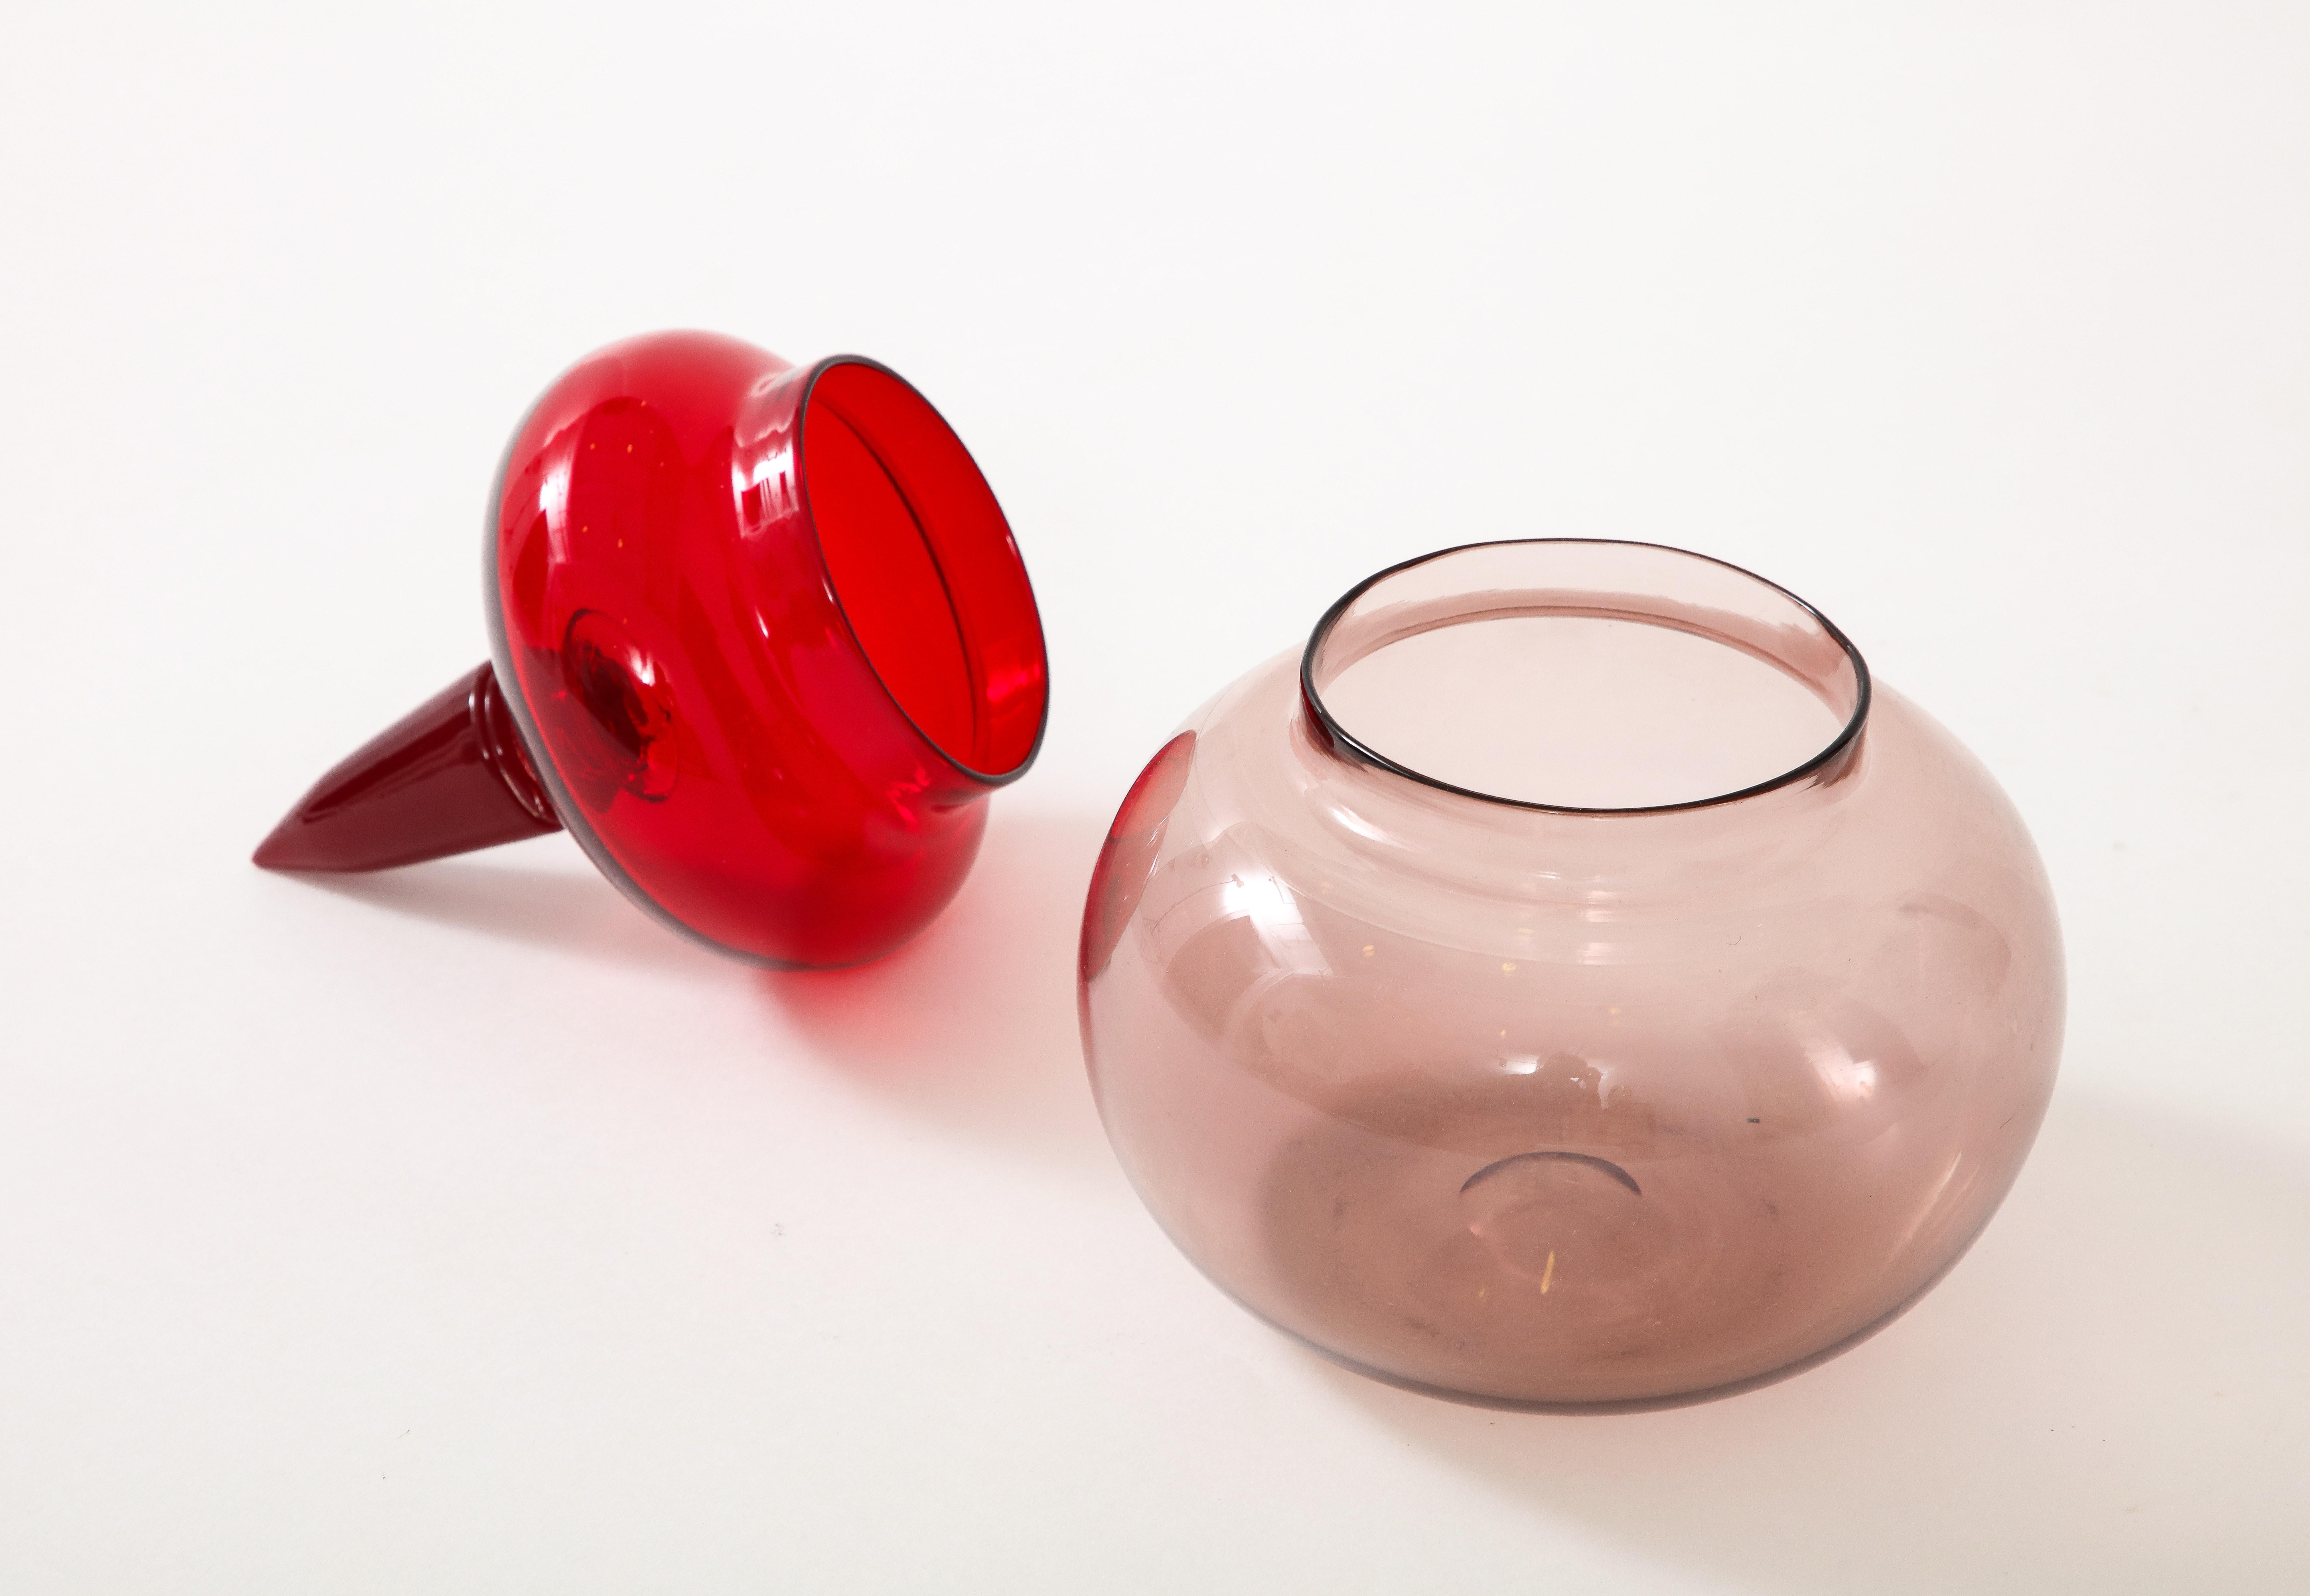 Hand-Crafted Paolo Venini Rare Apothecary Jar Model 4742 in Red and Mauve Glass, Italy, 1959 For Sale